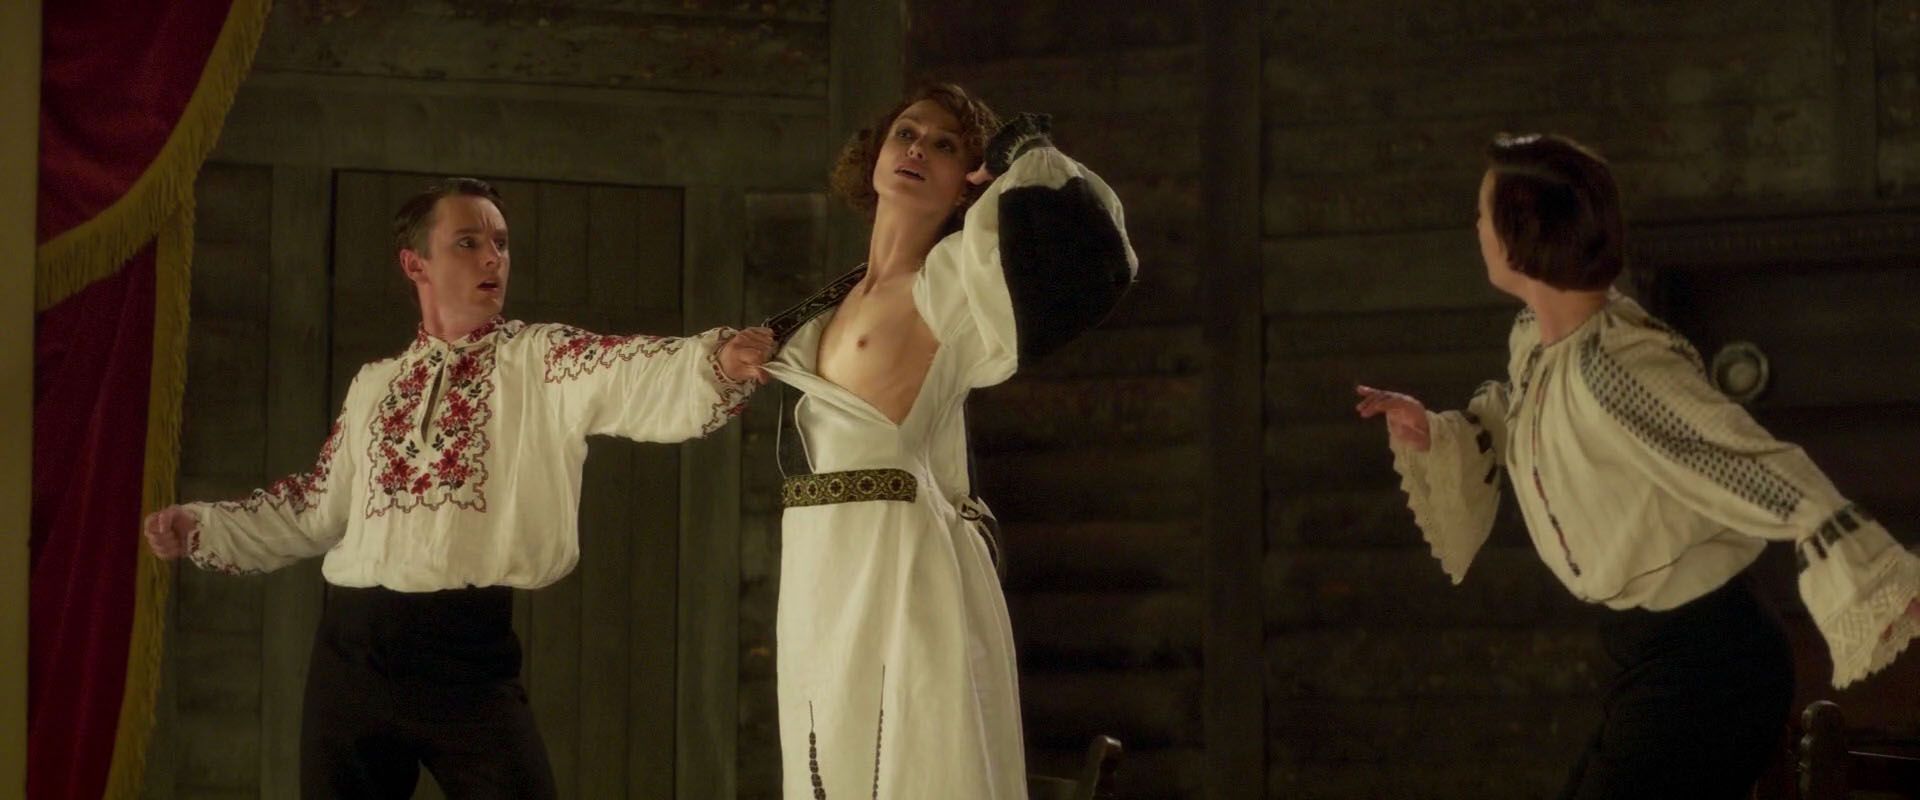 Keira Knightley and Eleanor Tomlinson Topless